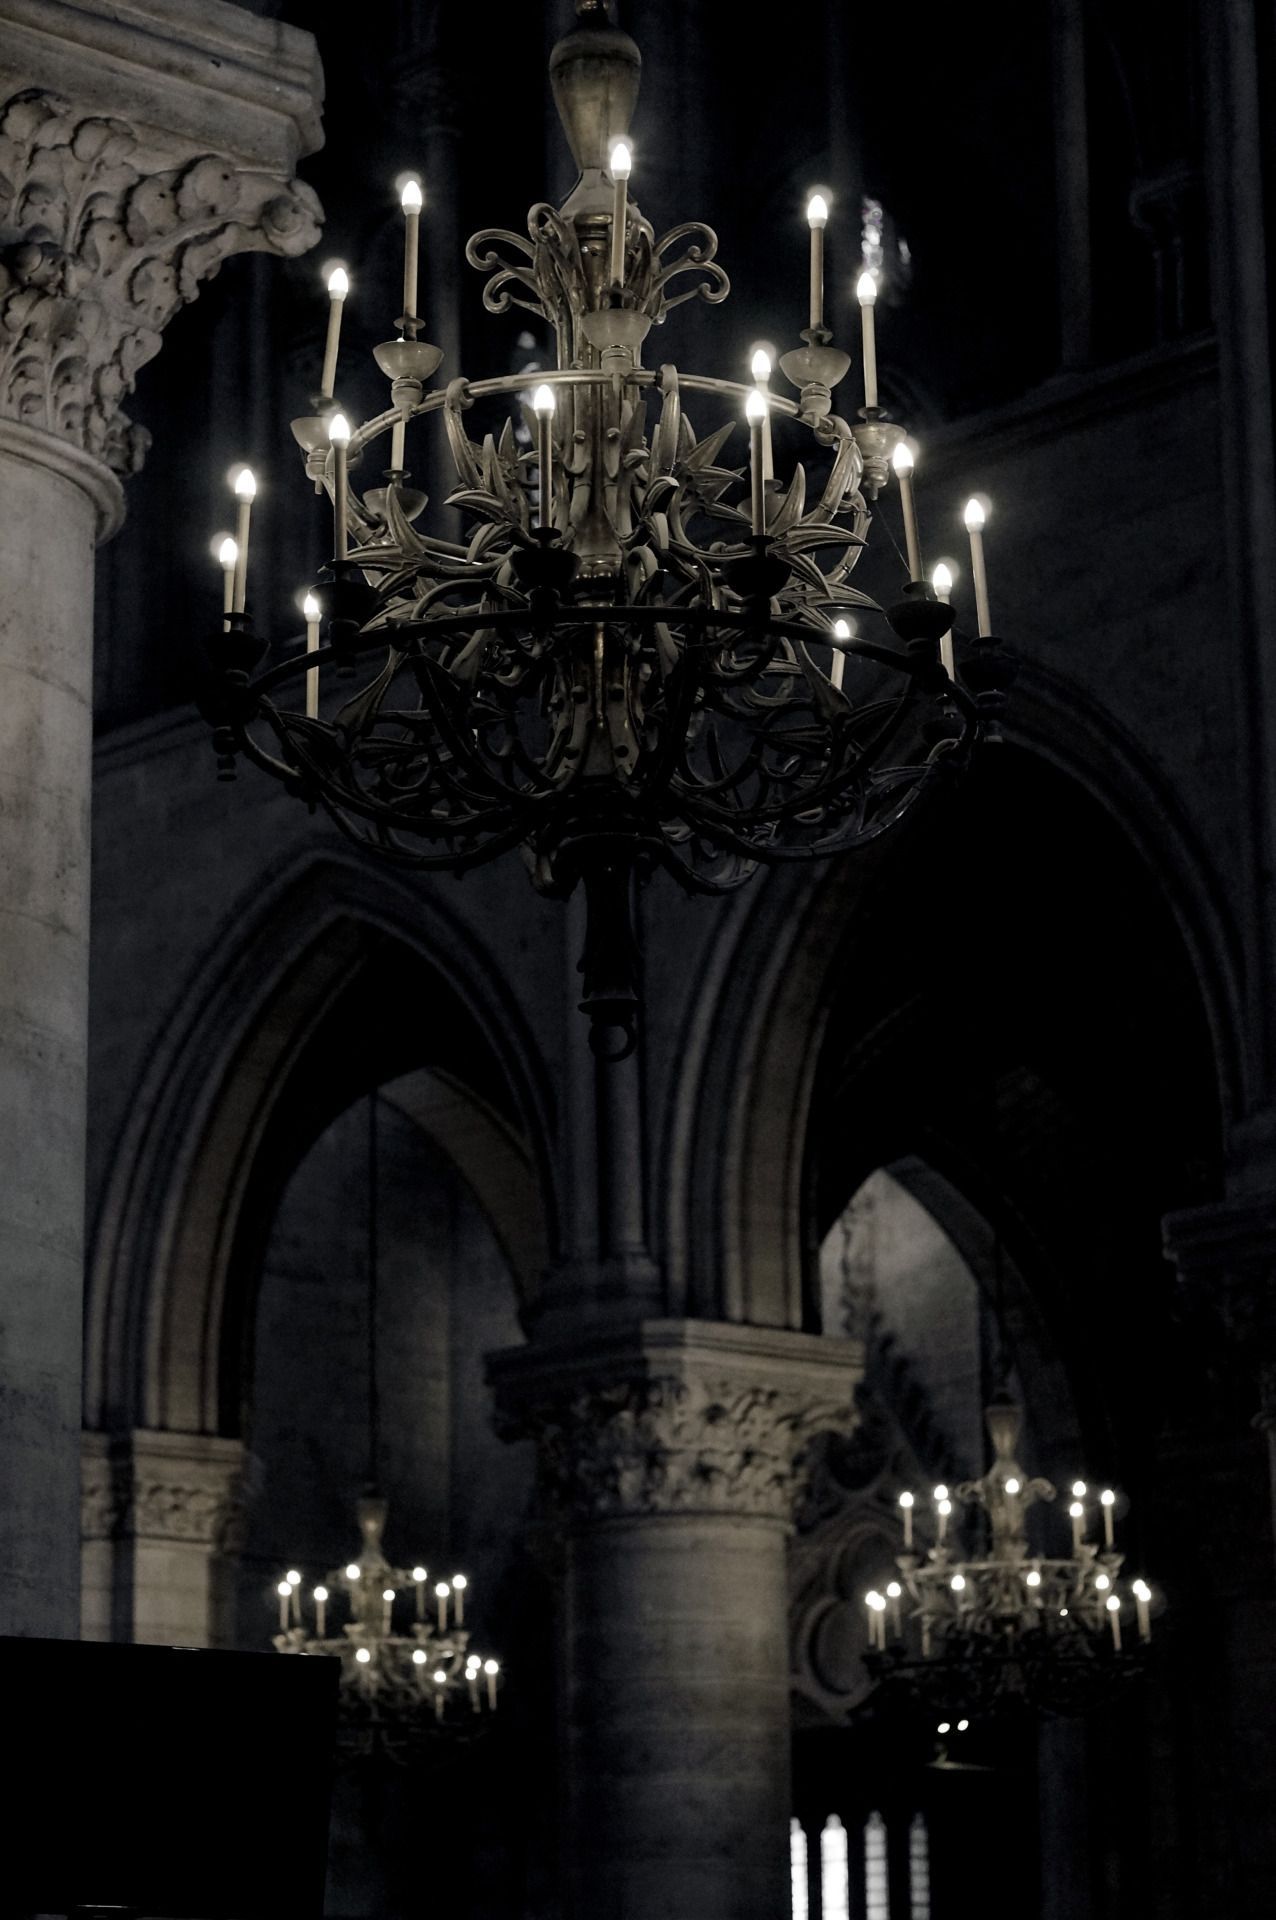 Two chandeliers hanging from the ceiling of a cathedral. - Gothic, architecture